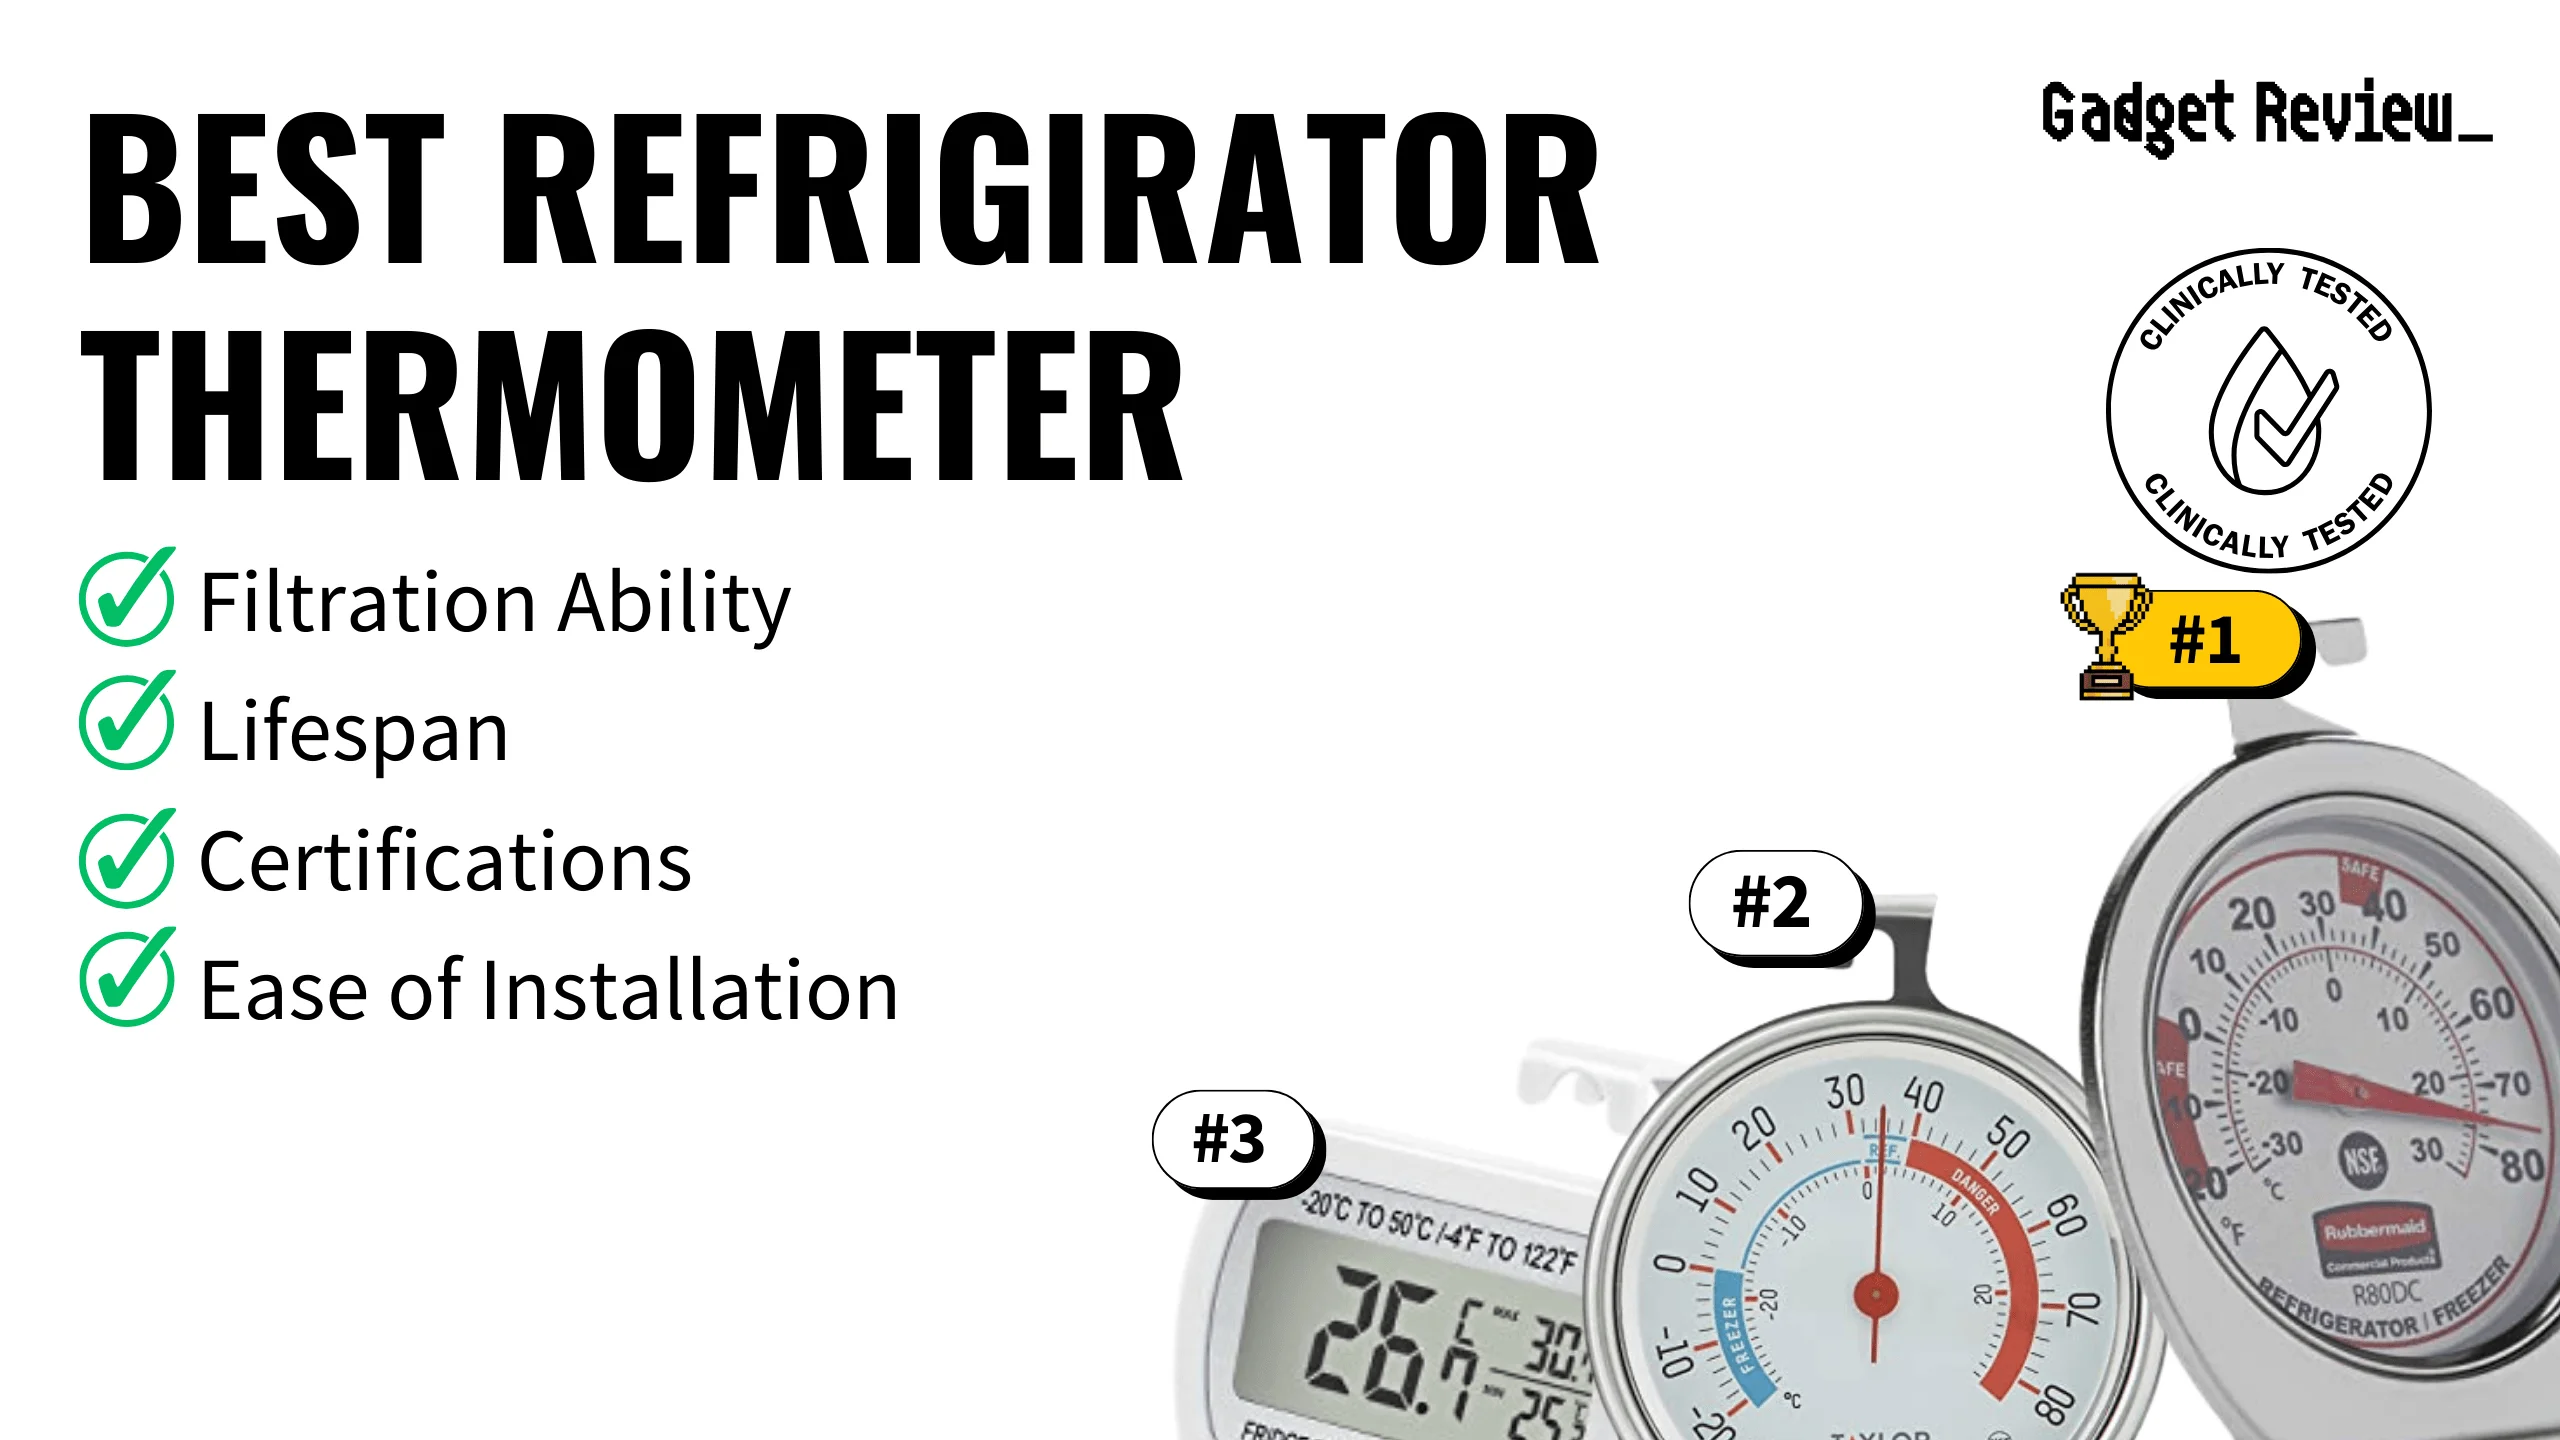 JSDOIN Freezer Refrigerator Refrigerator Thermometers Large Dial Thermometer  2 P